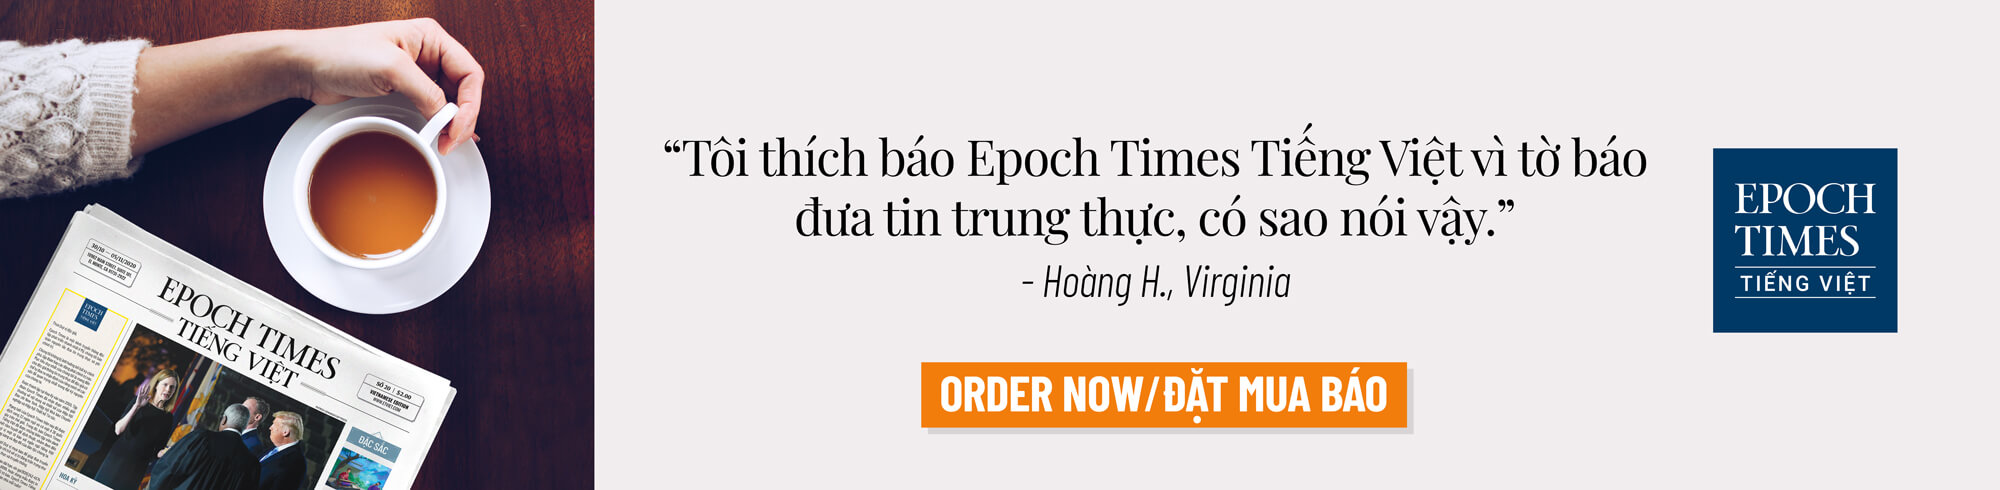 Subscription - Epoch Times Tiếng Việt